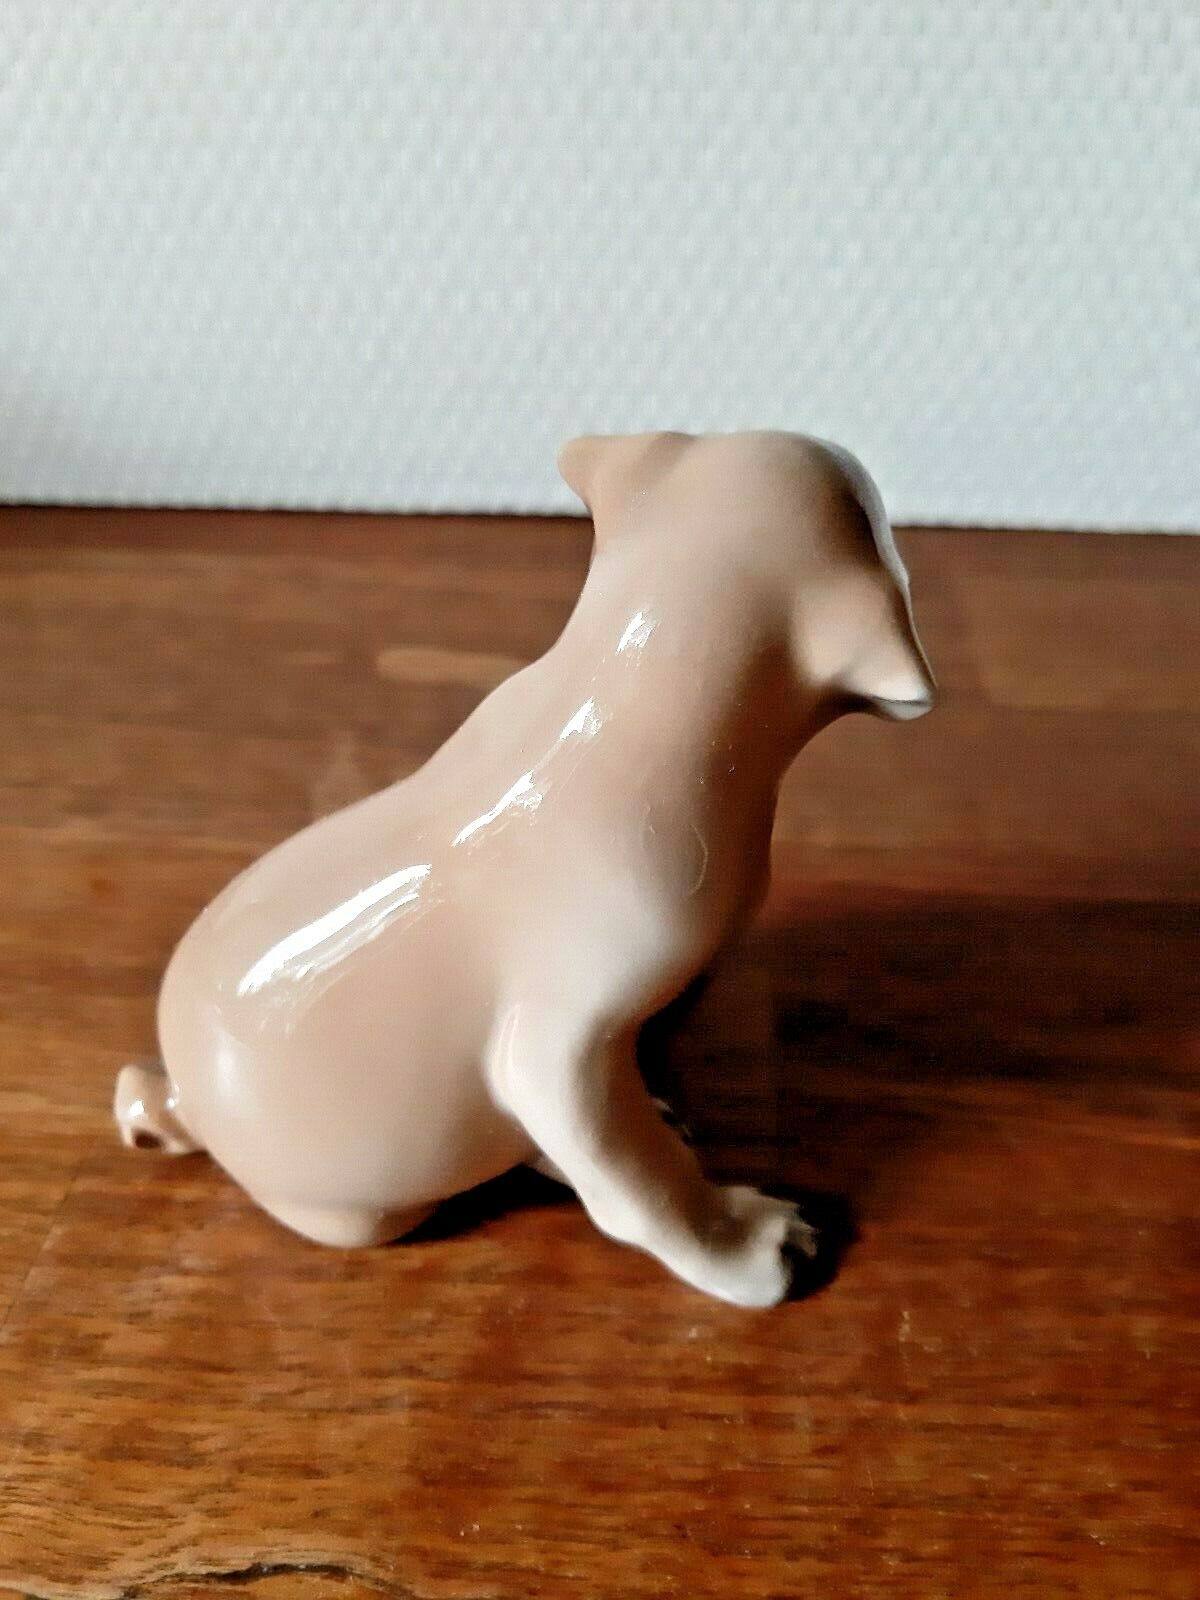 PUG PUPPY by Th Madsen for ROYAL COPENHAGEN # 3169 Fact FIRST & very sweet